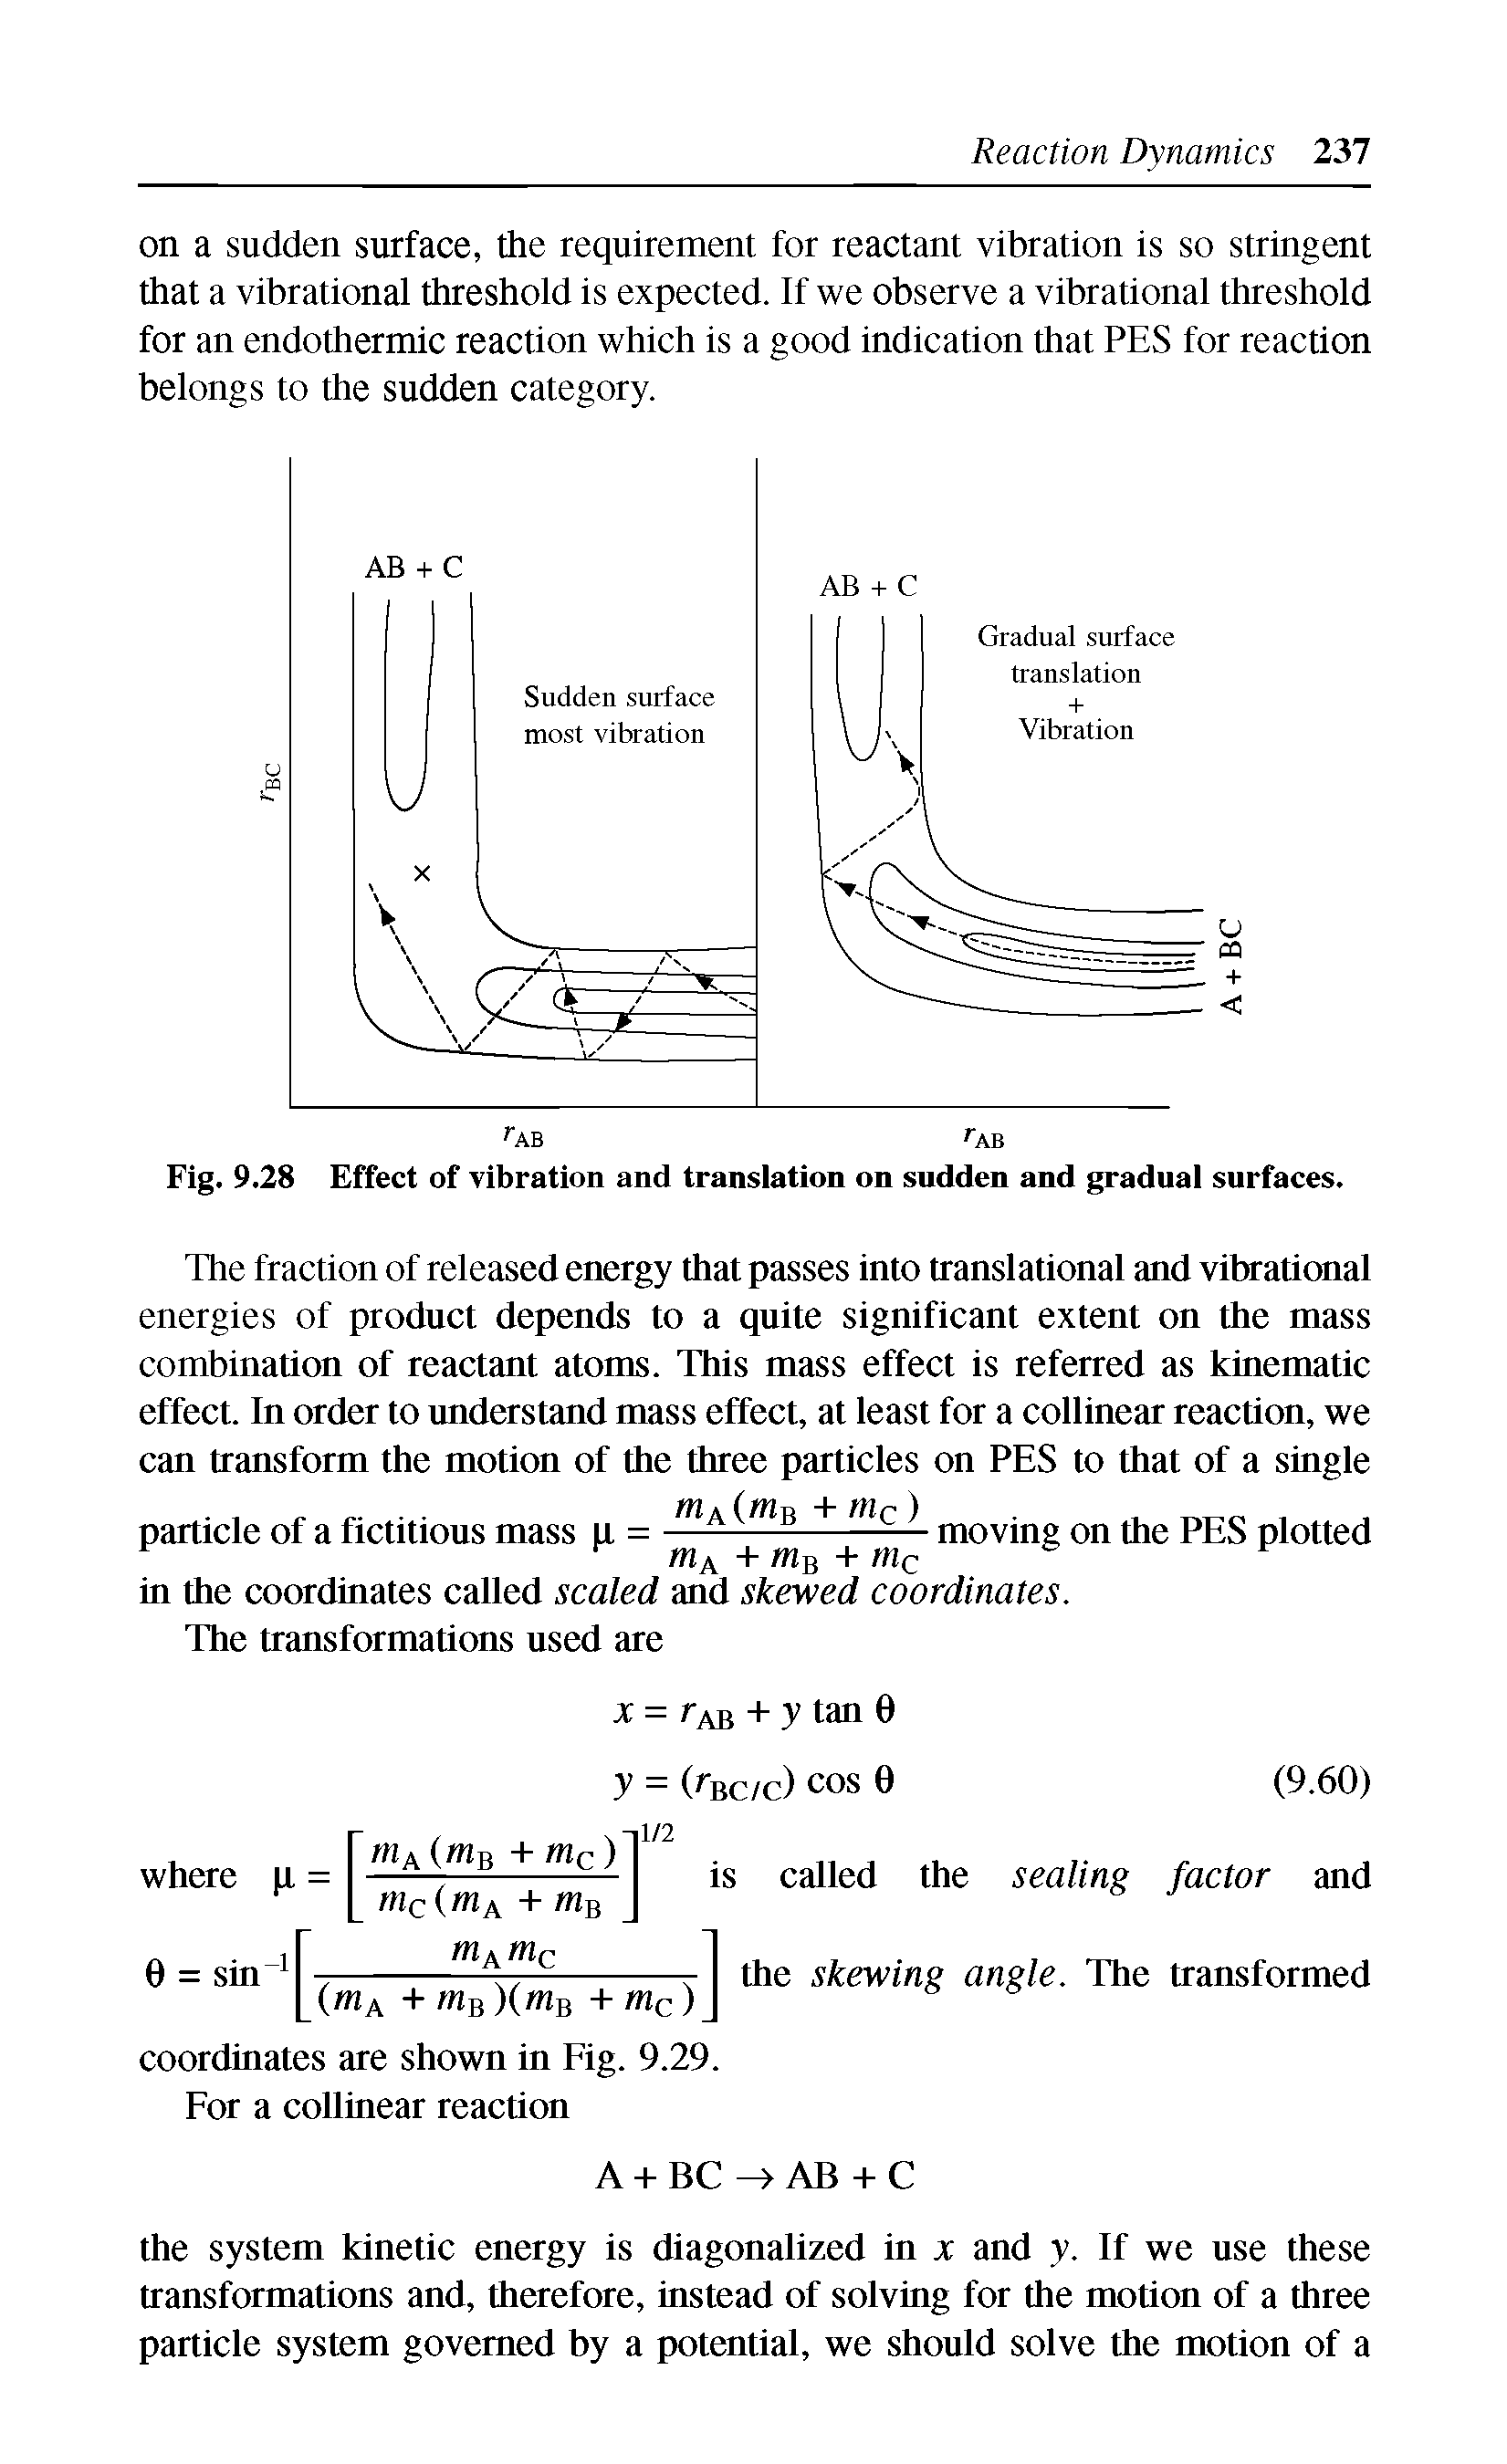 Fig. 9.28 Effect of vibration and translation on sudden and gradual surfaces.